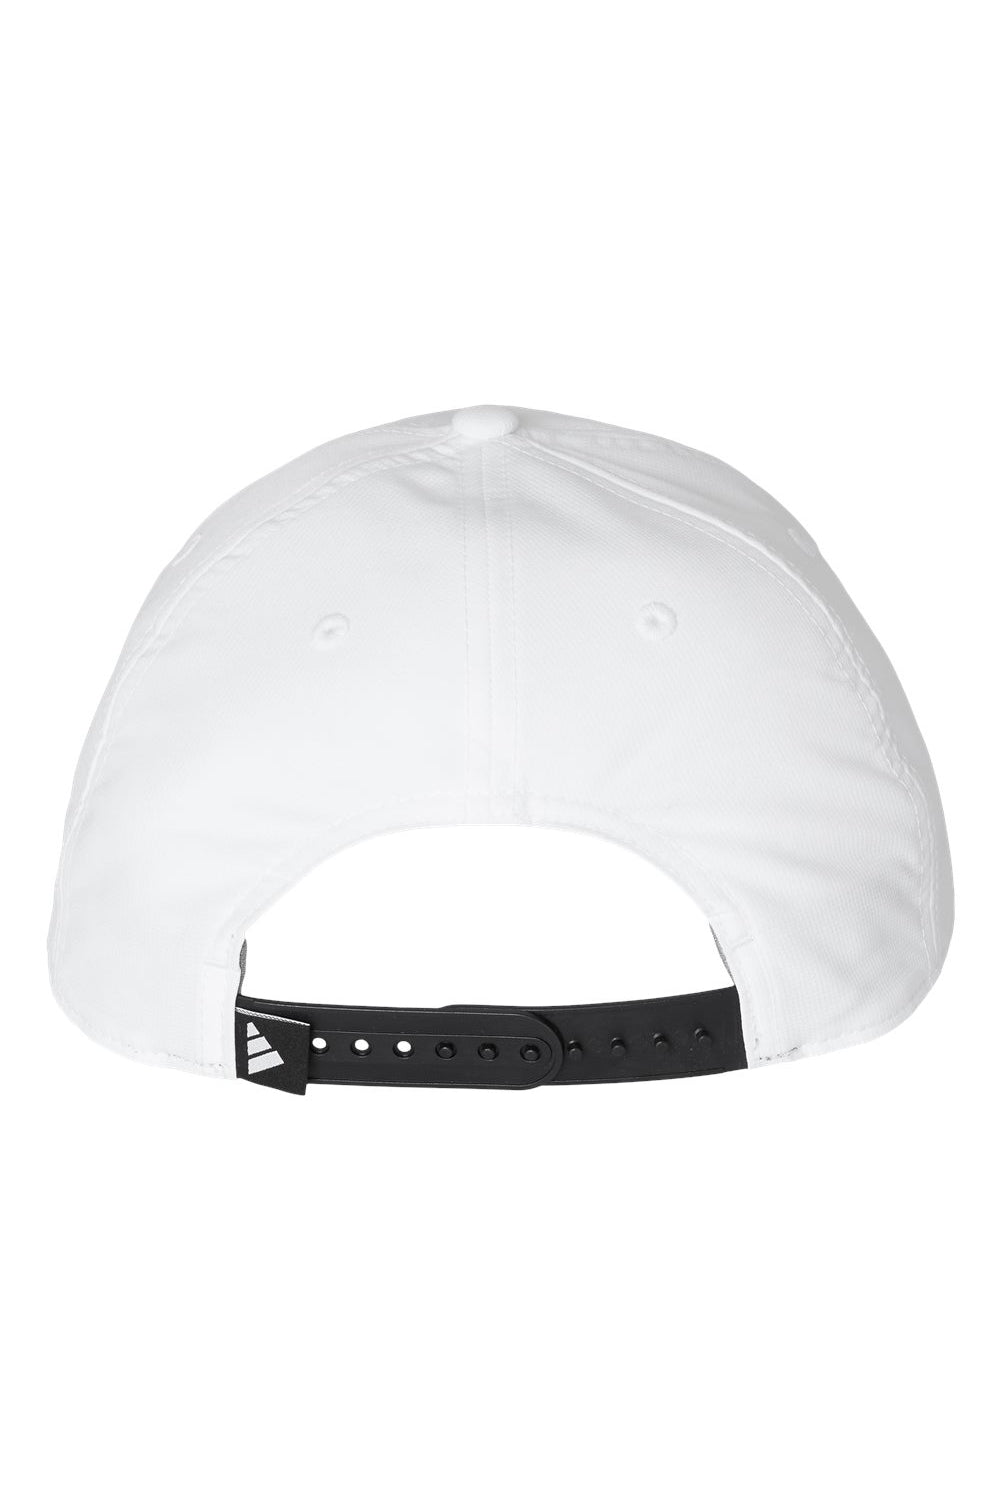 Adidas A605S Mens Sustainable Performance Moisture Wicking Snapback Hat White Flat Back